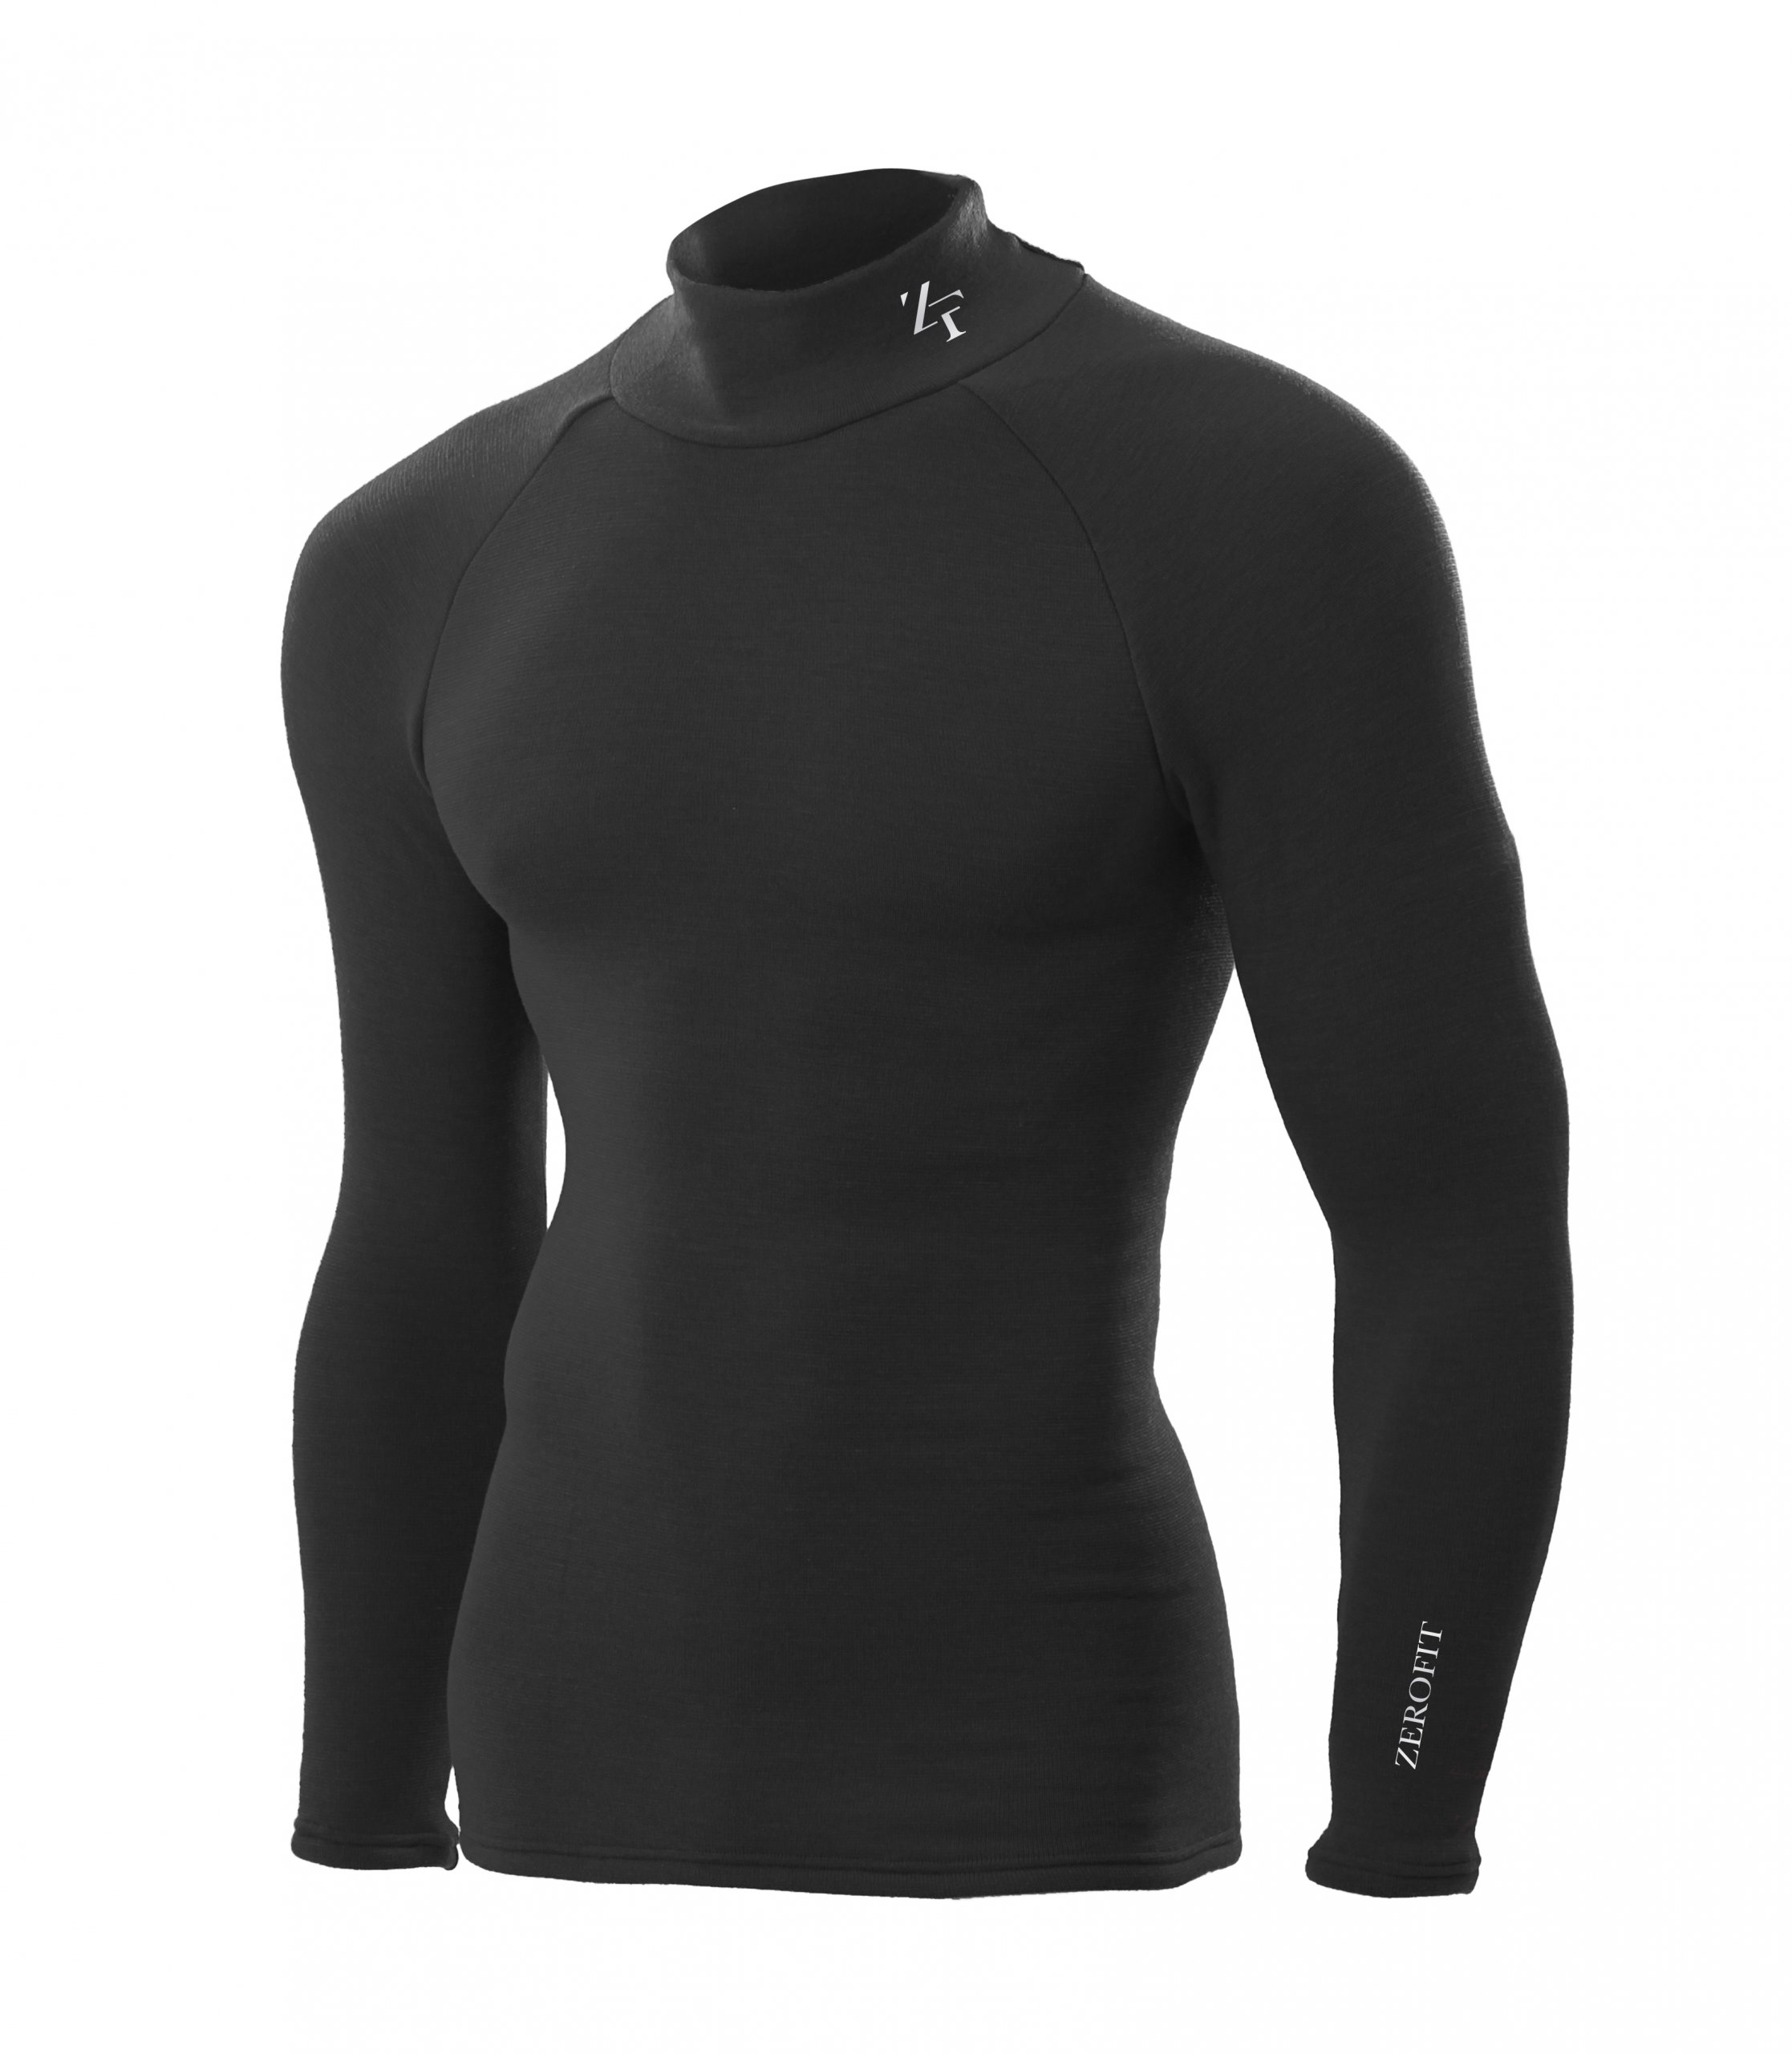 Best Ski Base Layers in the UK - InTheSnow